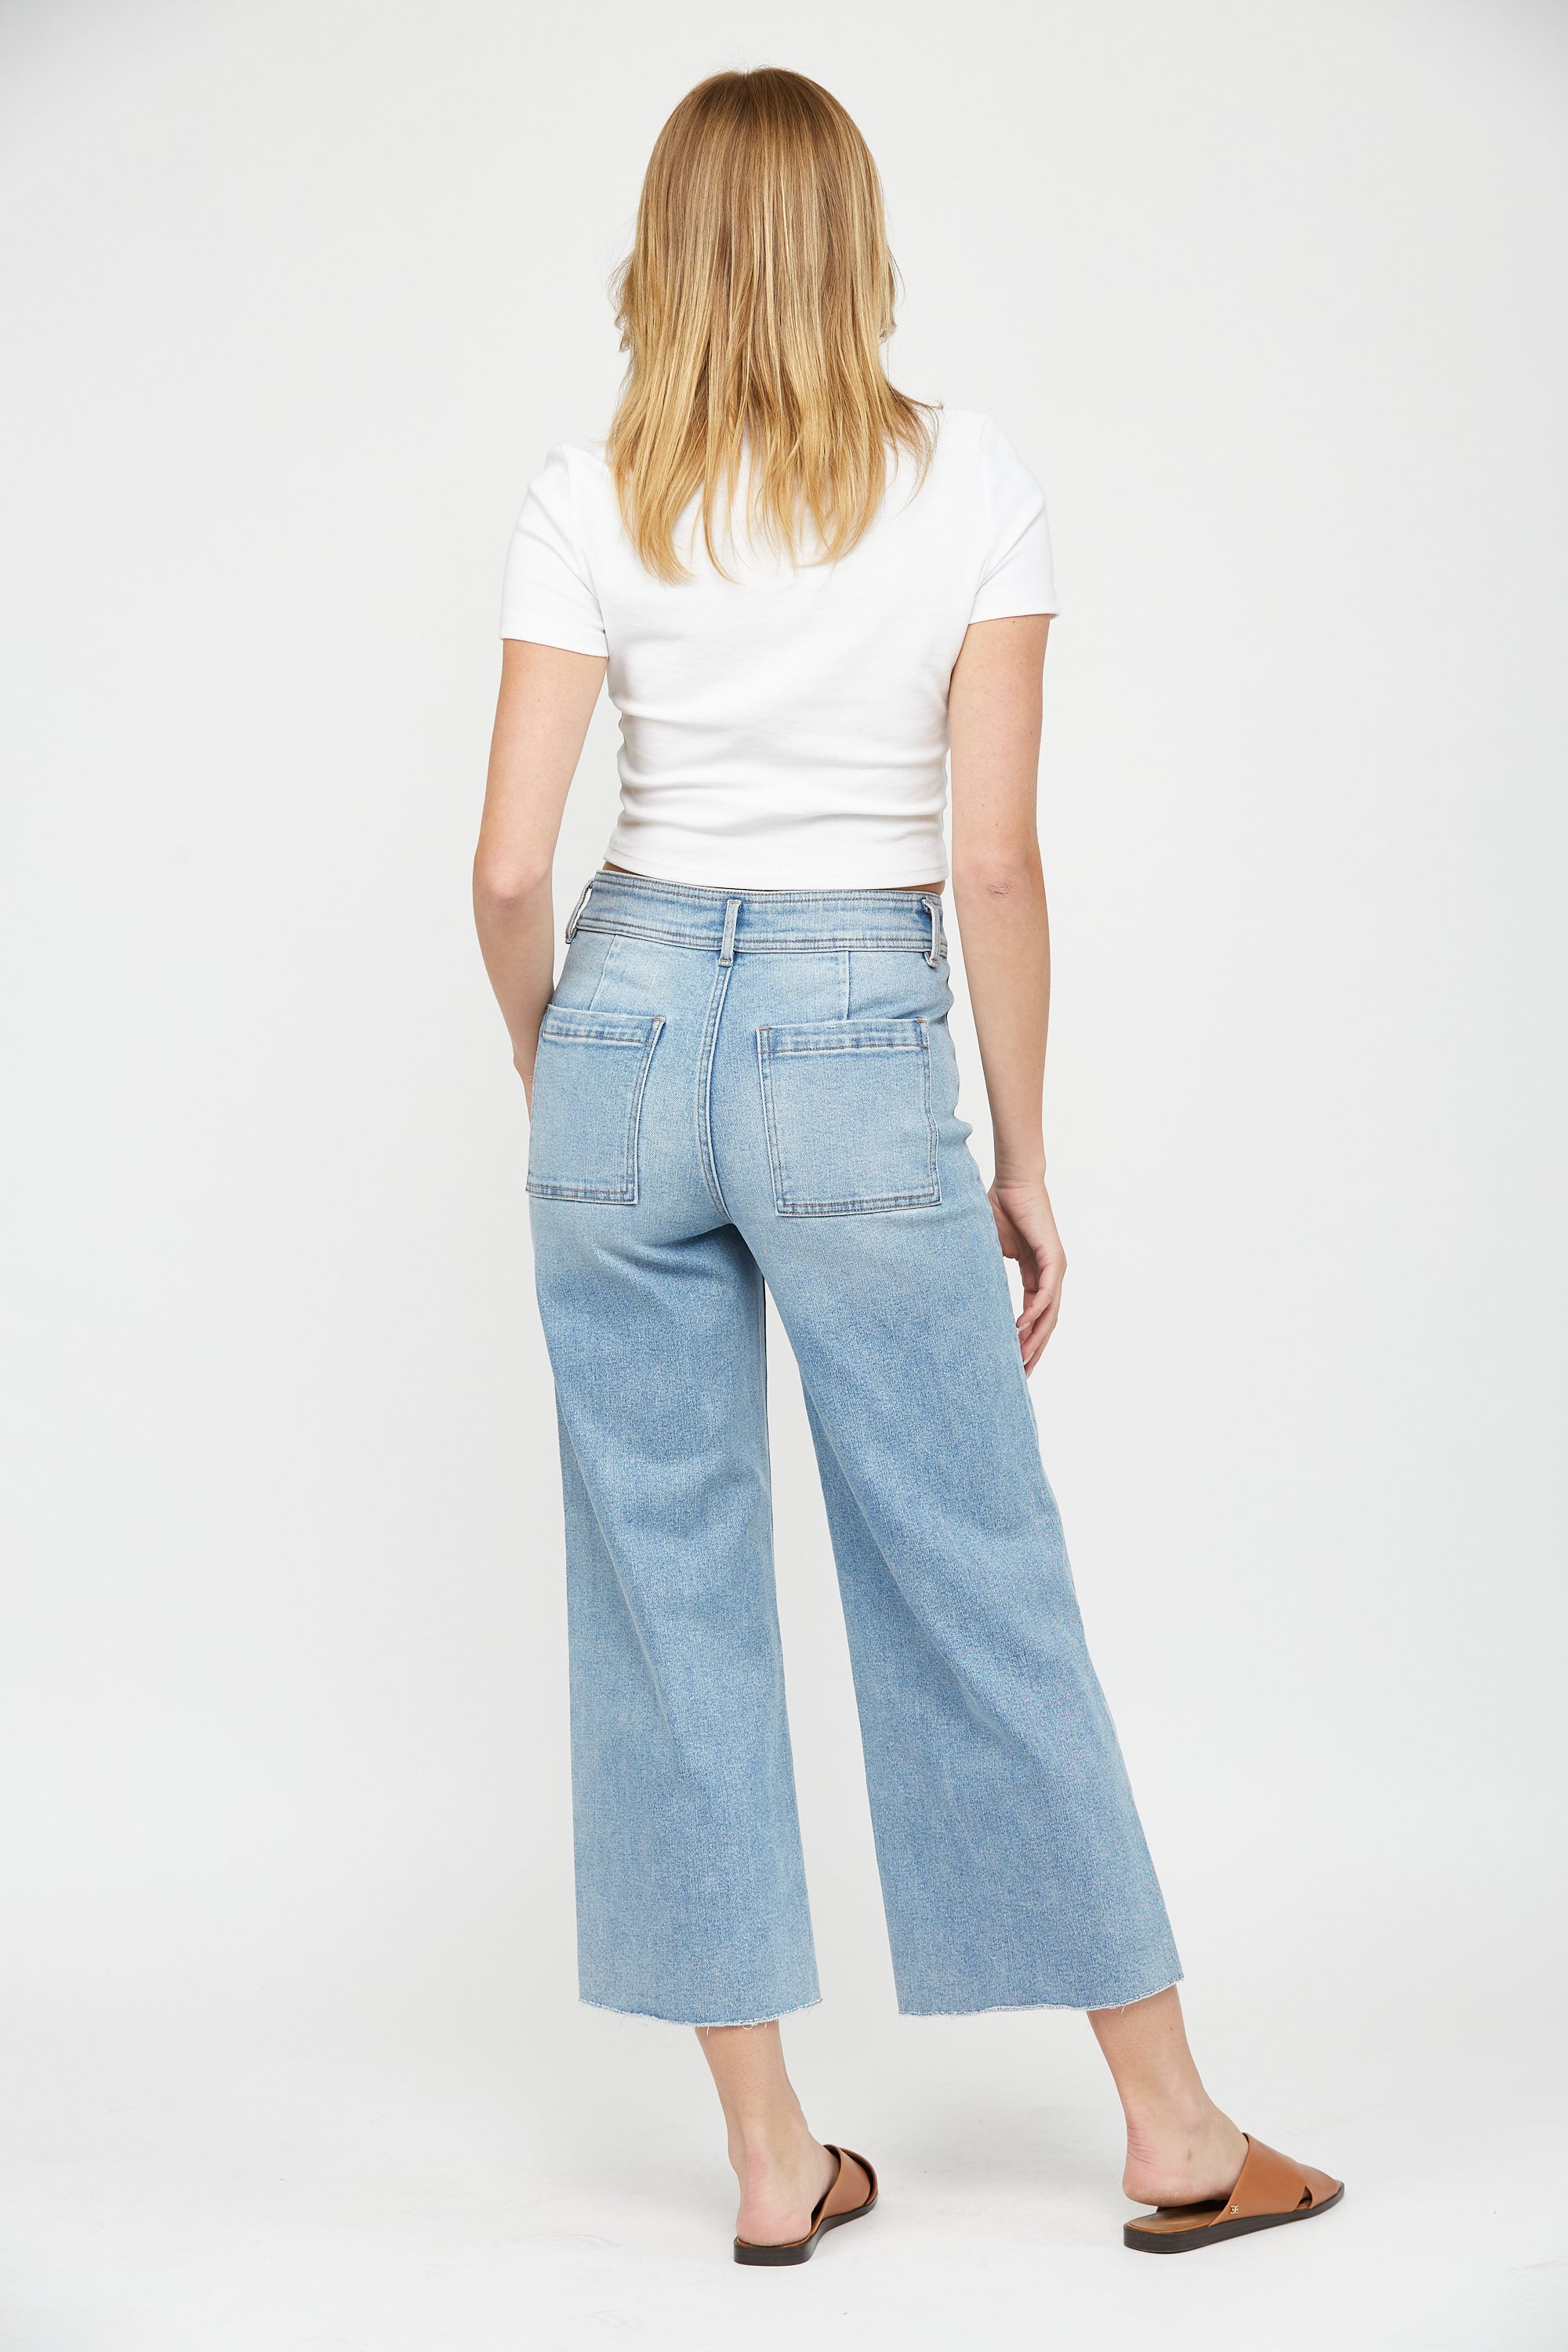 High Fell - Jeans - - MDP-S247 Mica Denim for Crop Skinny SaltTree Rise You